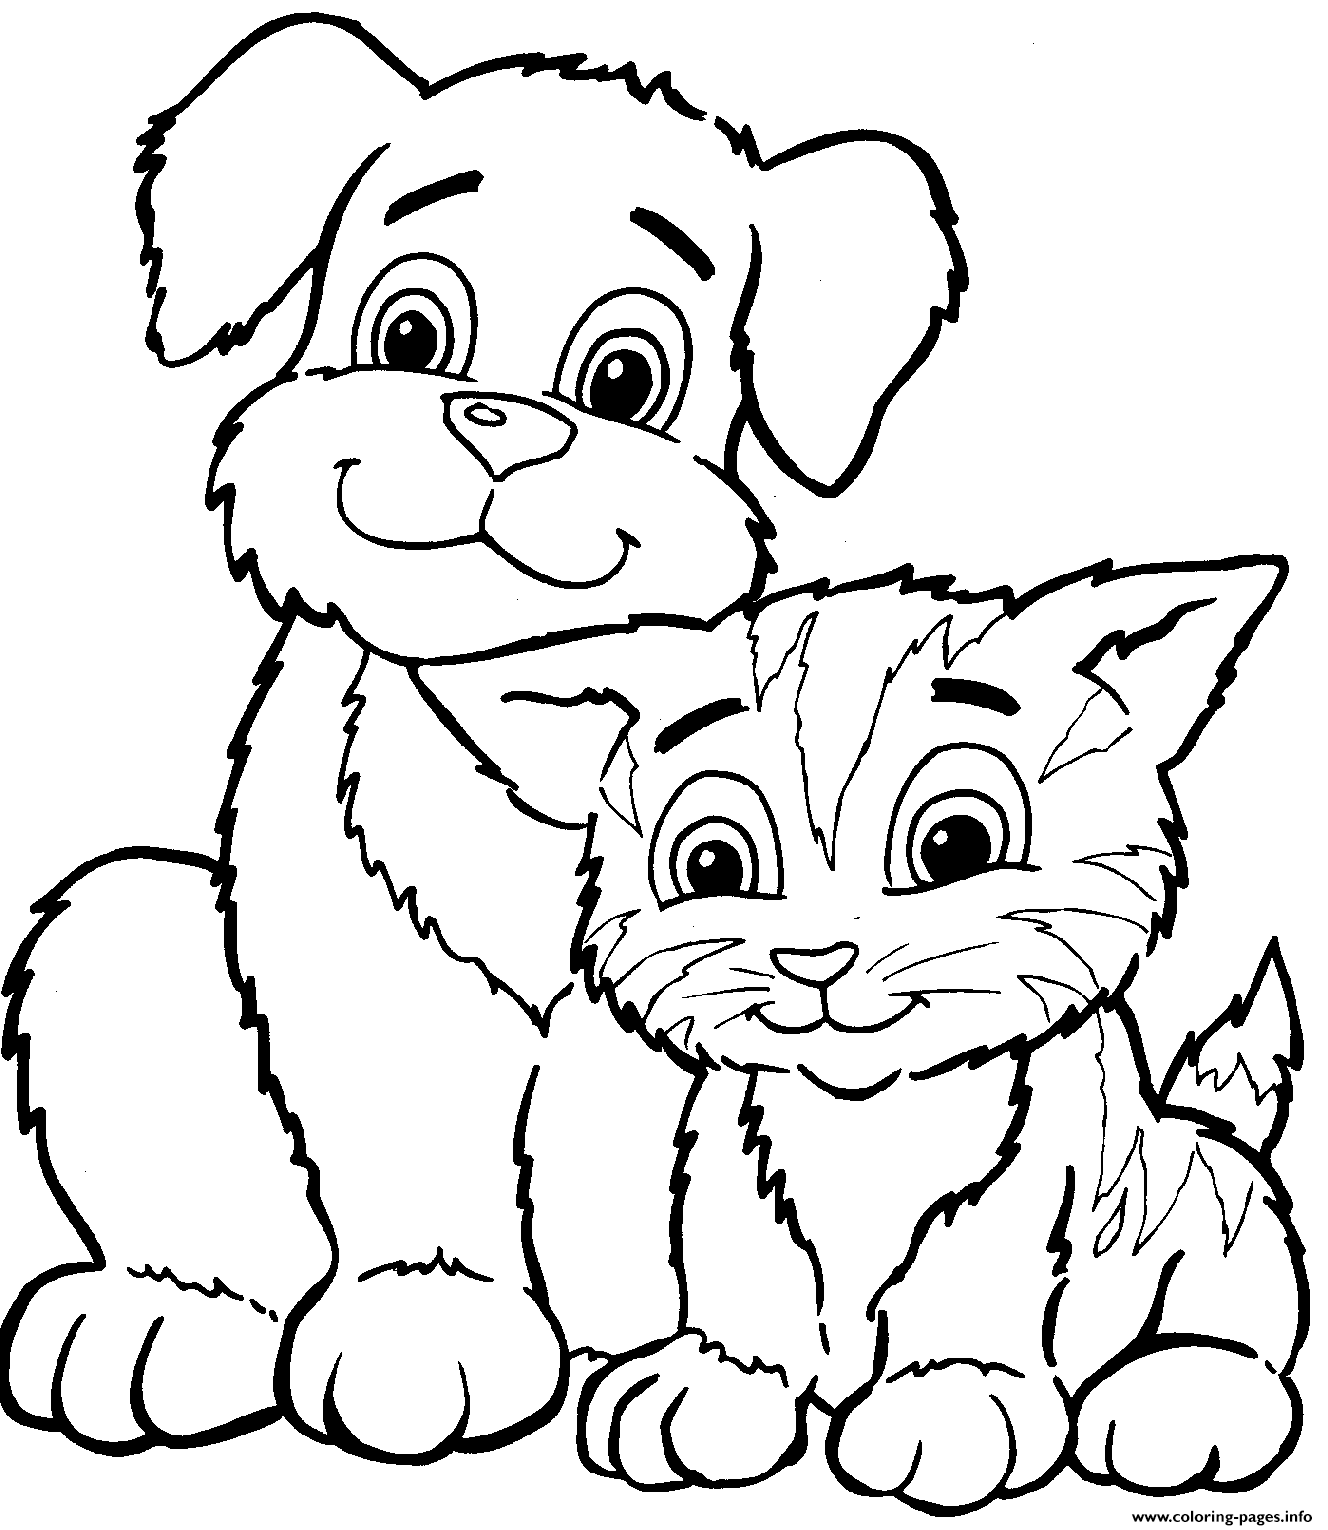  With Dogs And Catsa091 coloring